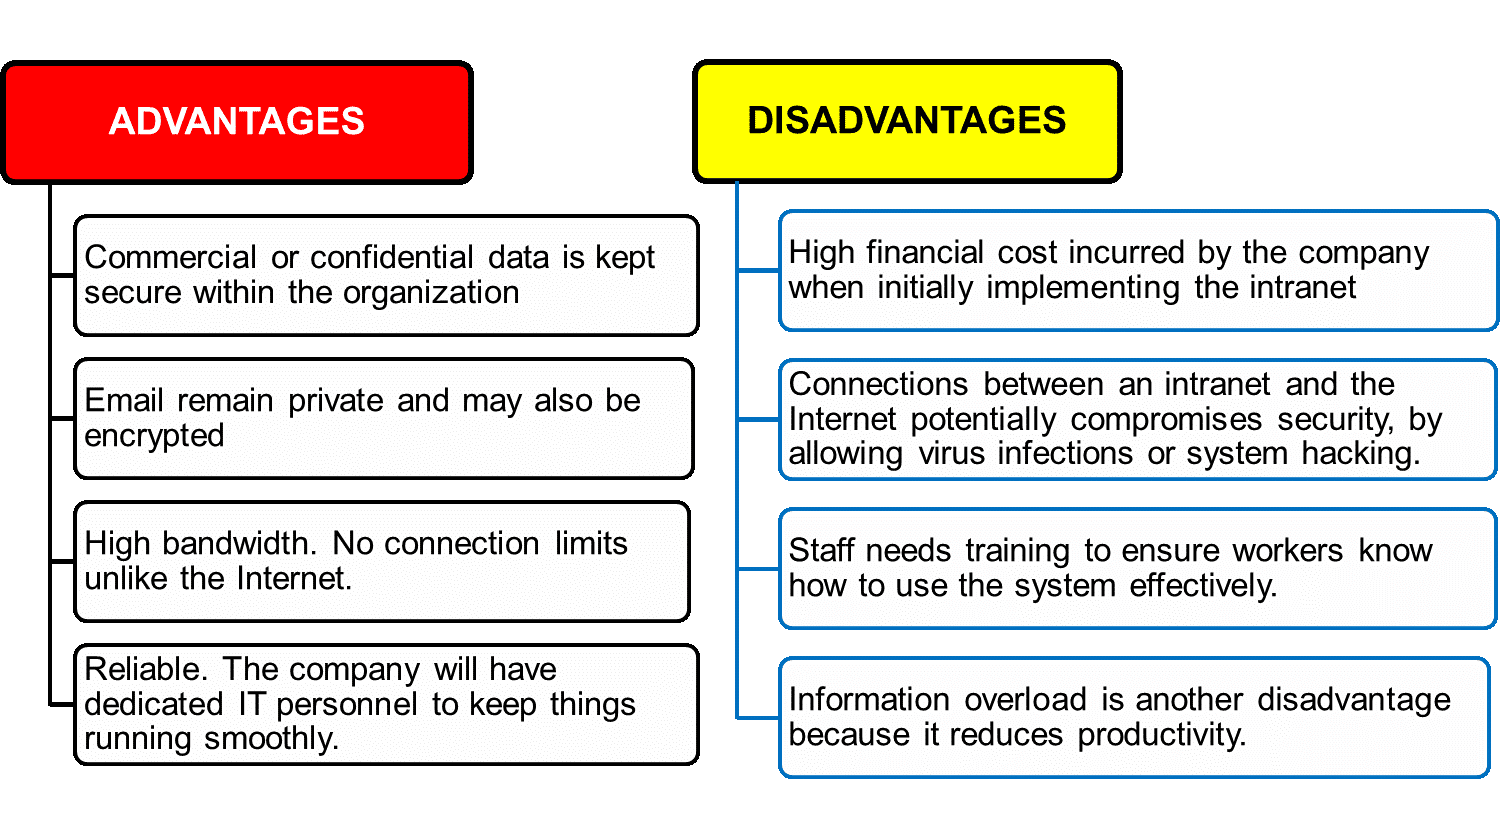 Advantages of technology. Advantages and disadvantages of Internet. Disadvantages of the Internet. Advantages of the Internet disadvantages of the Internet. What are the advantages and disadvantages of the Internet?.